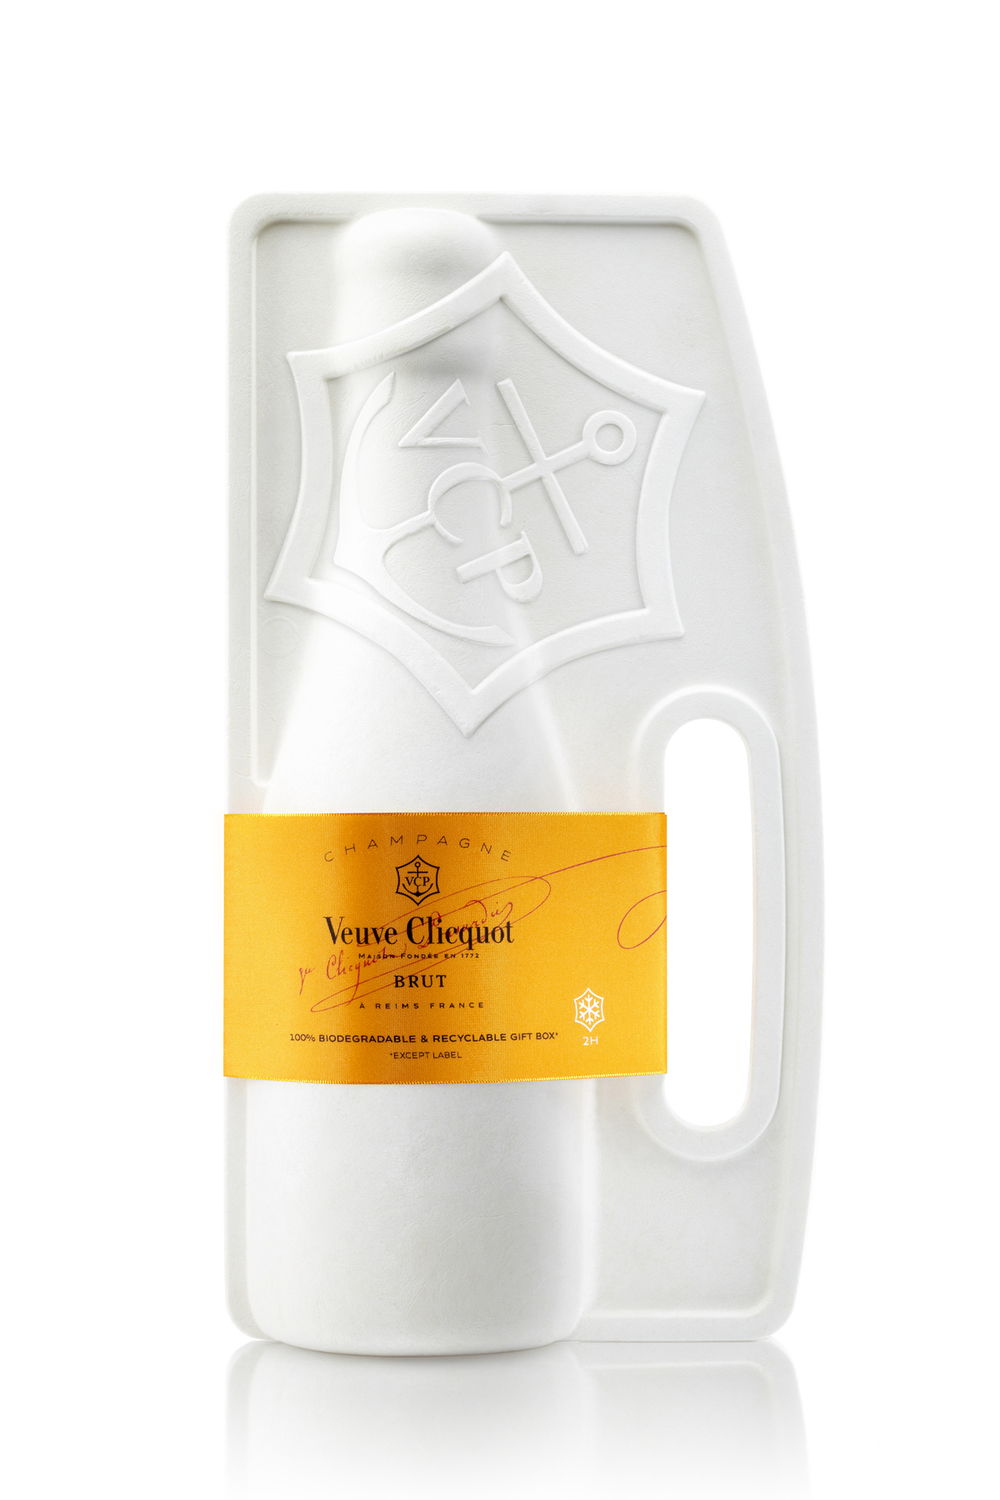 Naturally Cliquot packaging